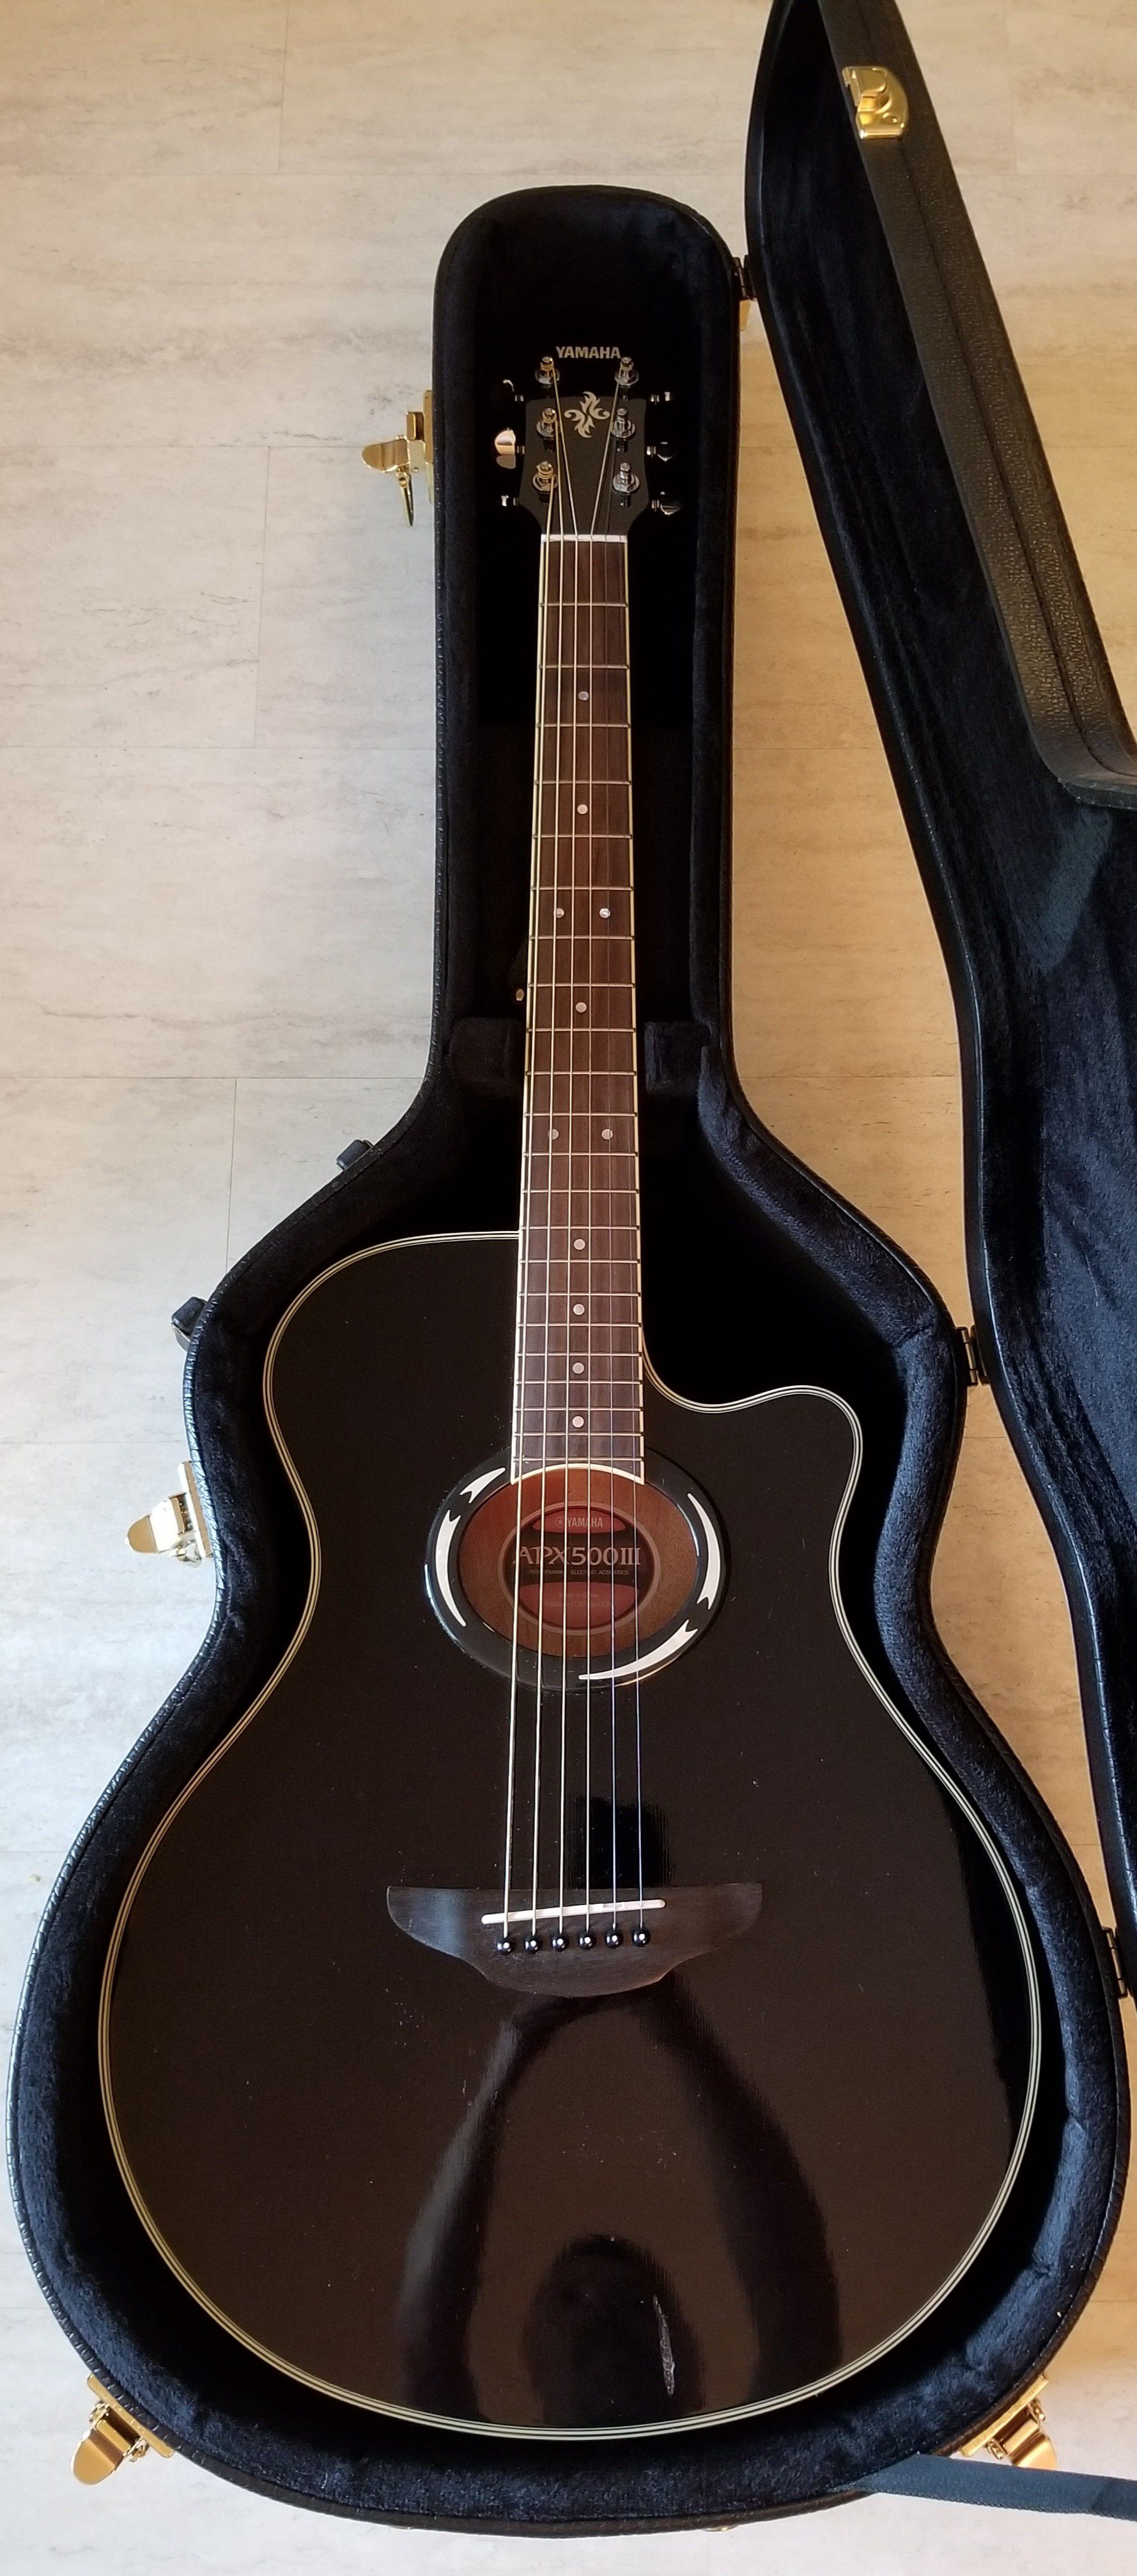 Yamaha APX500III Thinline Cutaway Acoustic-Electric Guitar w/ Deluxe Hardshell Case - Trades?